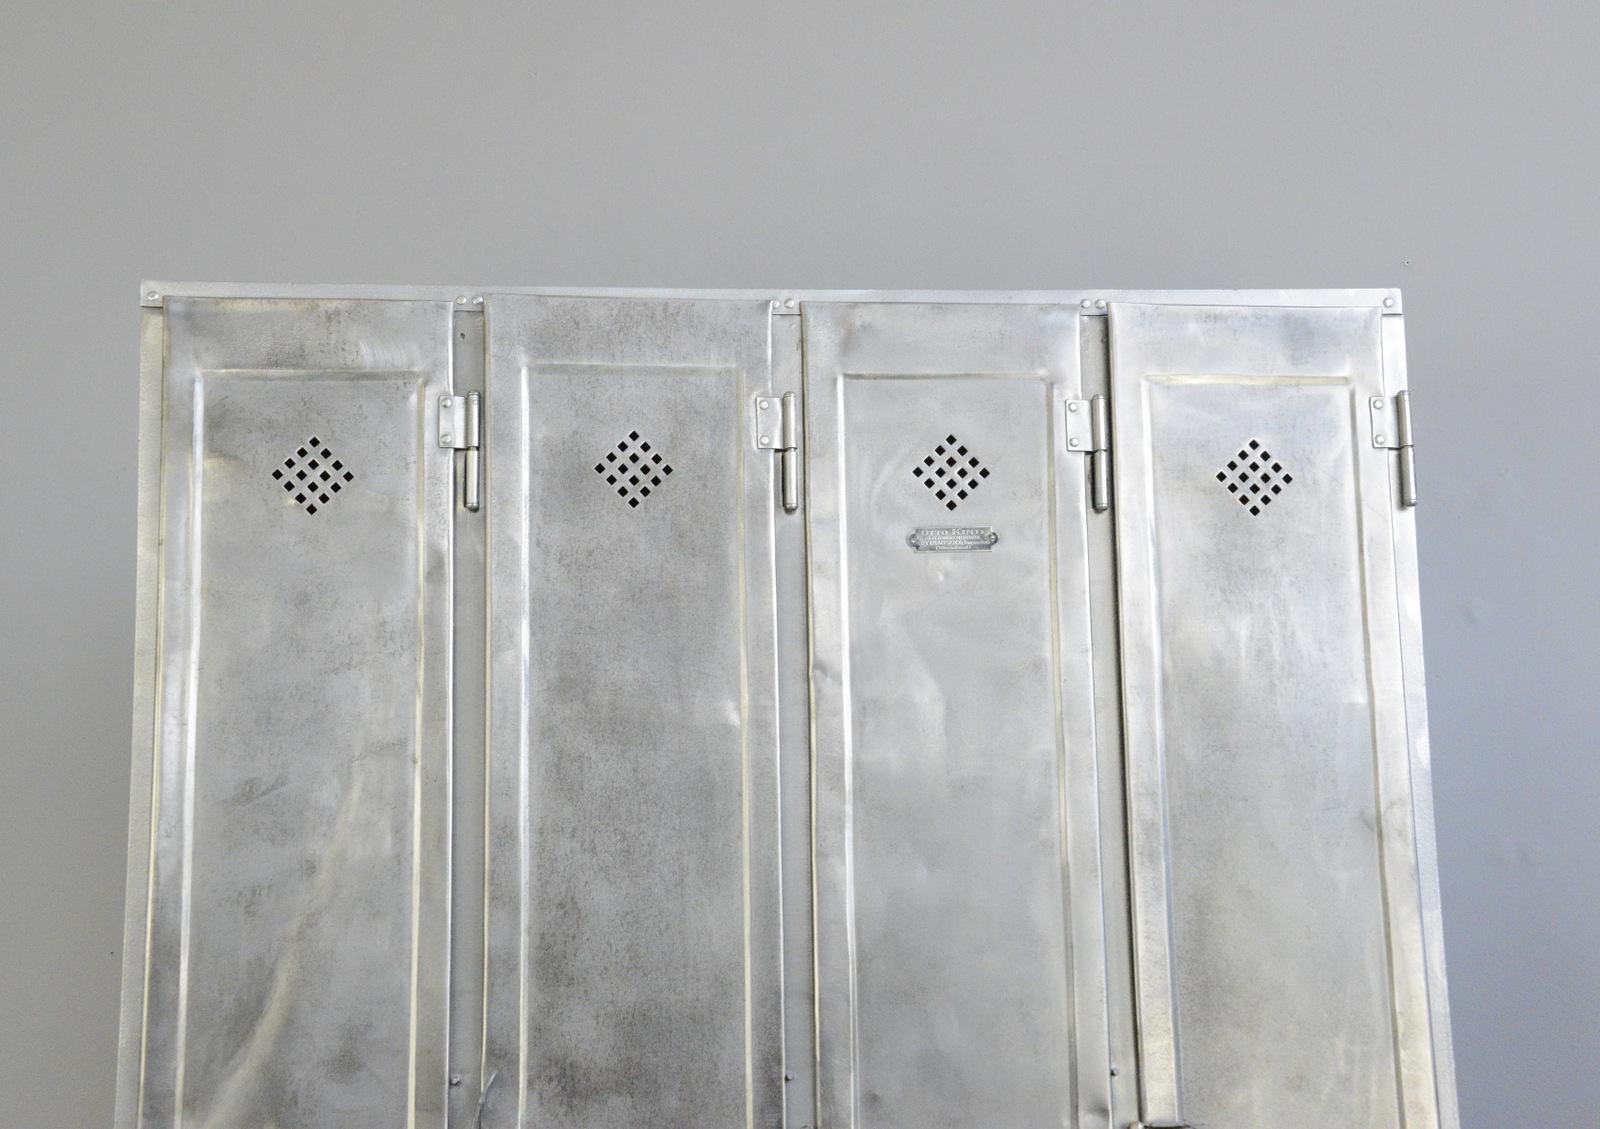 Four door industrial lockers by Otto Kind, circa 1920s

- Made from sheet steel
- Diamond shaped vents
- 4 hanging hooks and 1 shelf in each compartment
- Made by Otto Kind
- German ~ 1920s
- 120cm wide x 33cm deep x 175cm tall

Condition